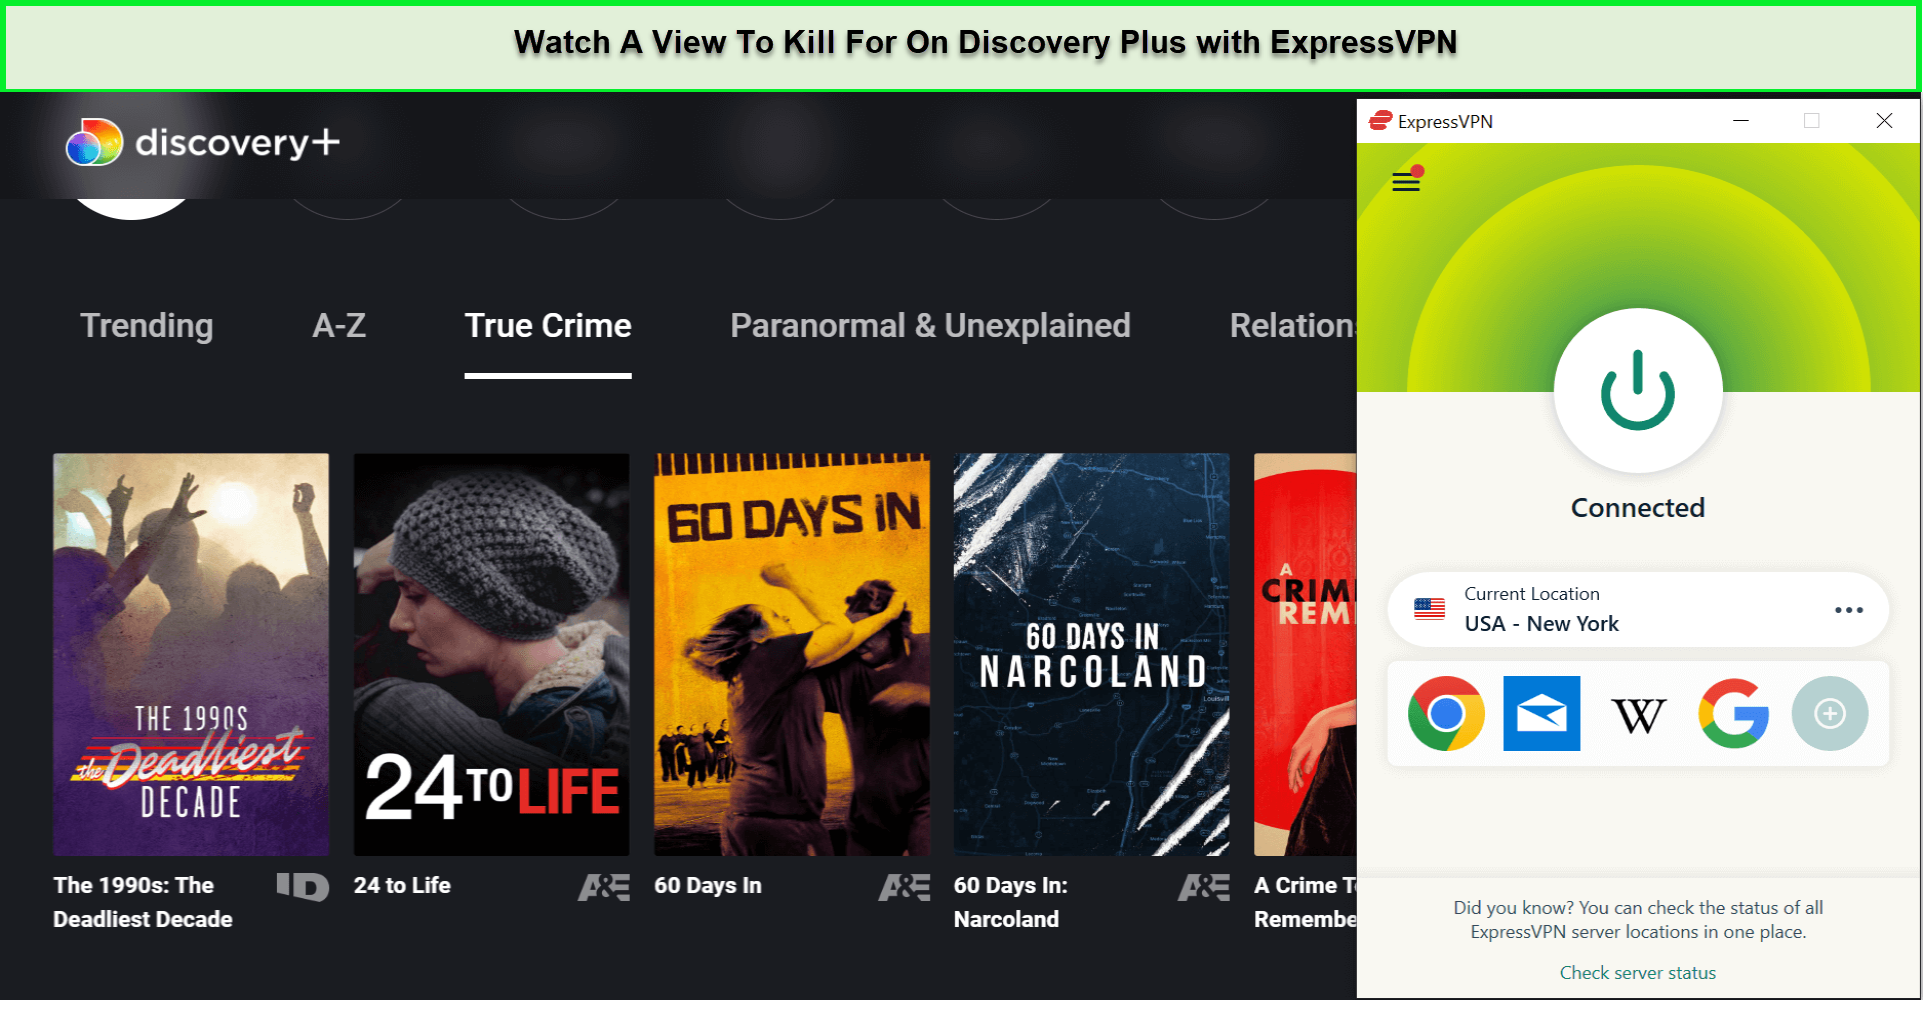 Watch-A-View-To-Kill-For-in-Spain-On-Discovery-Plus-with-ExpressVPN